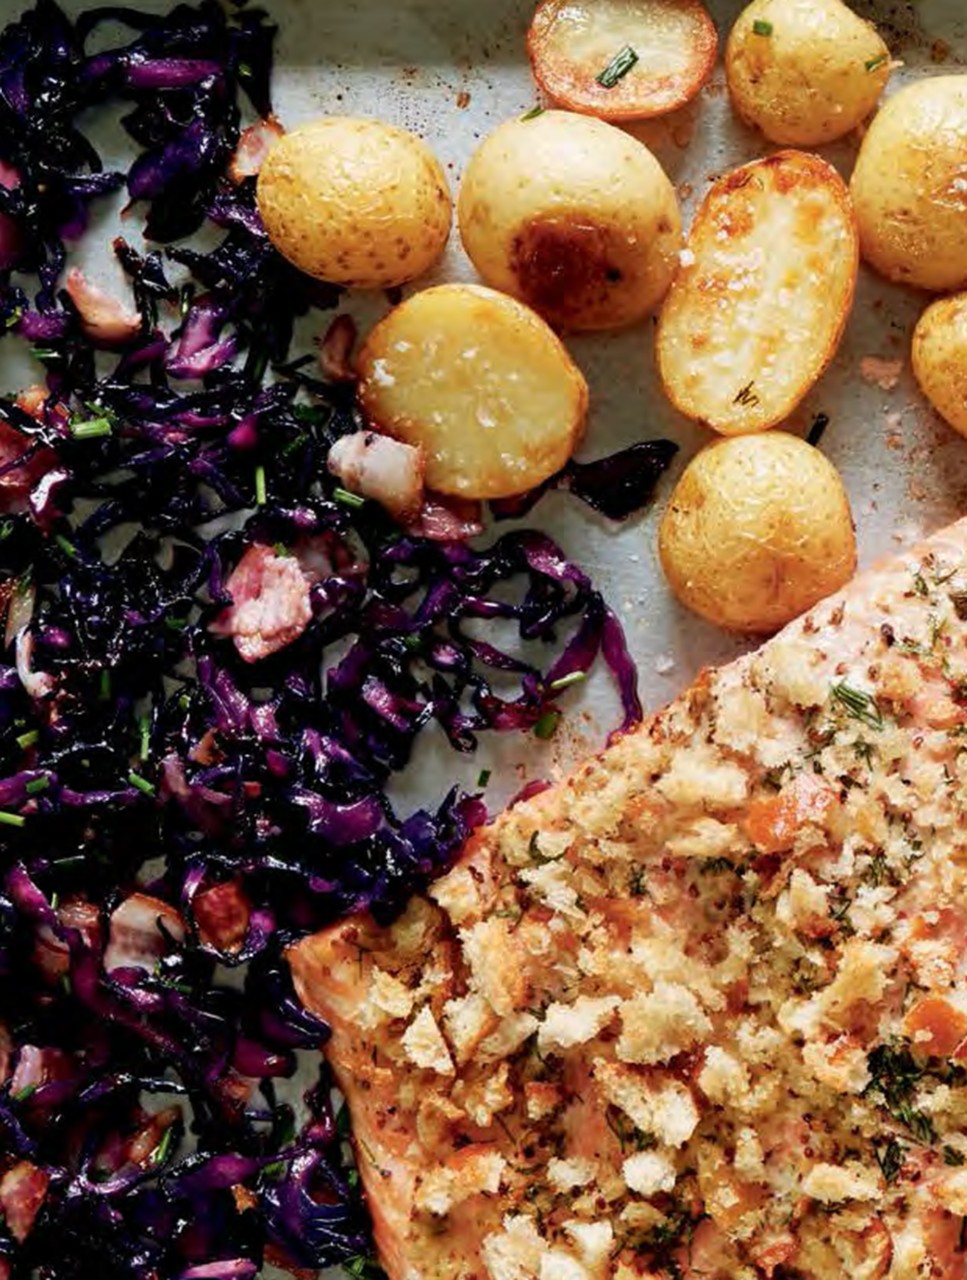 Mustard-Crumbed Salmon with Sweet & Sour Cabbage & Roast Potatoes